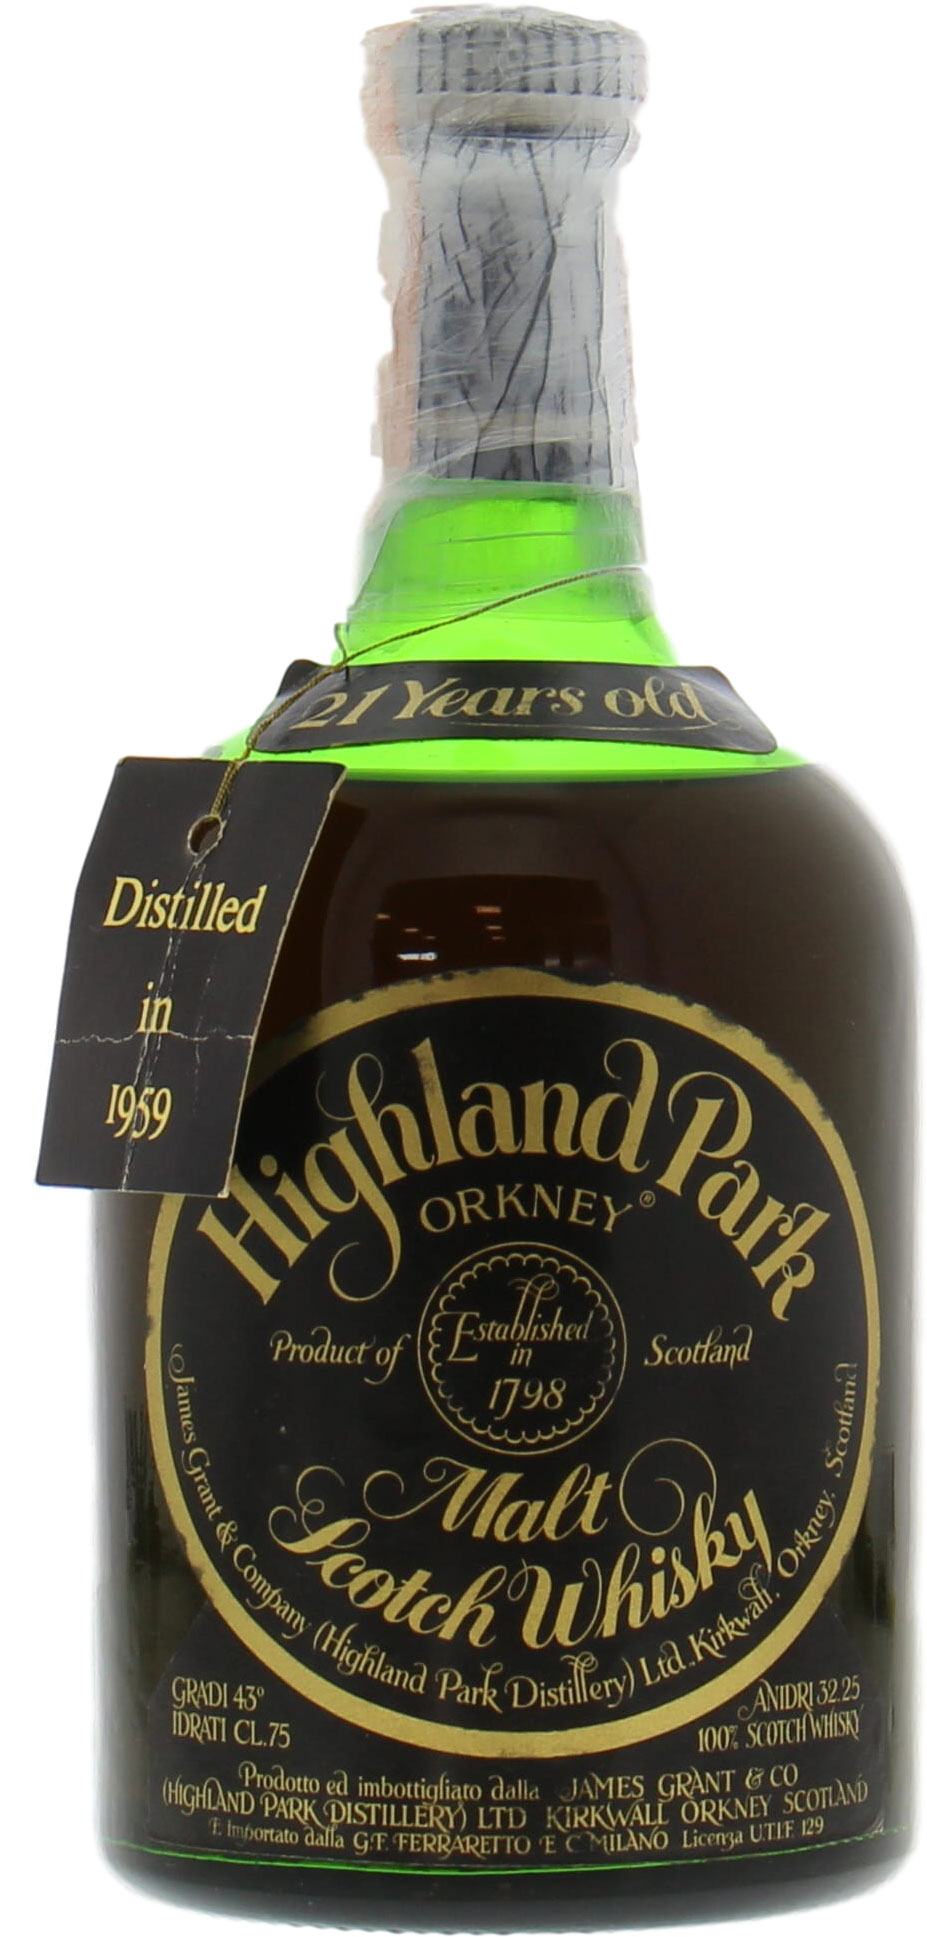 Highland Park - 1959 21 Years Old 43% 1959 In Original Container